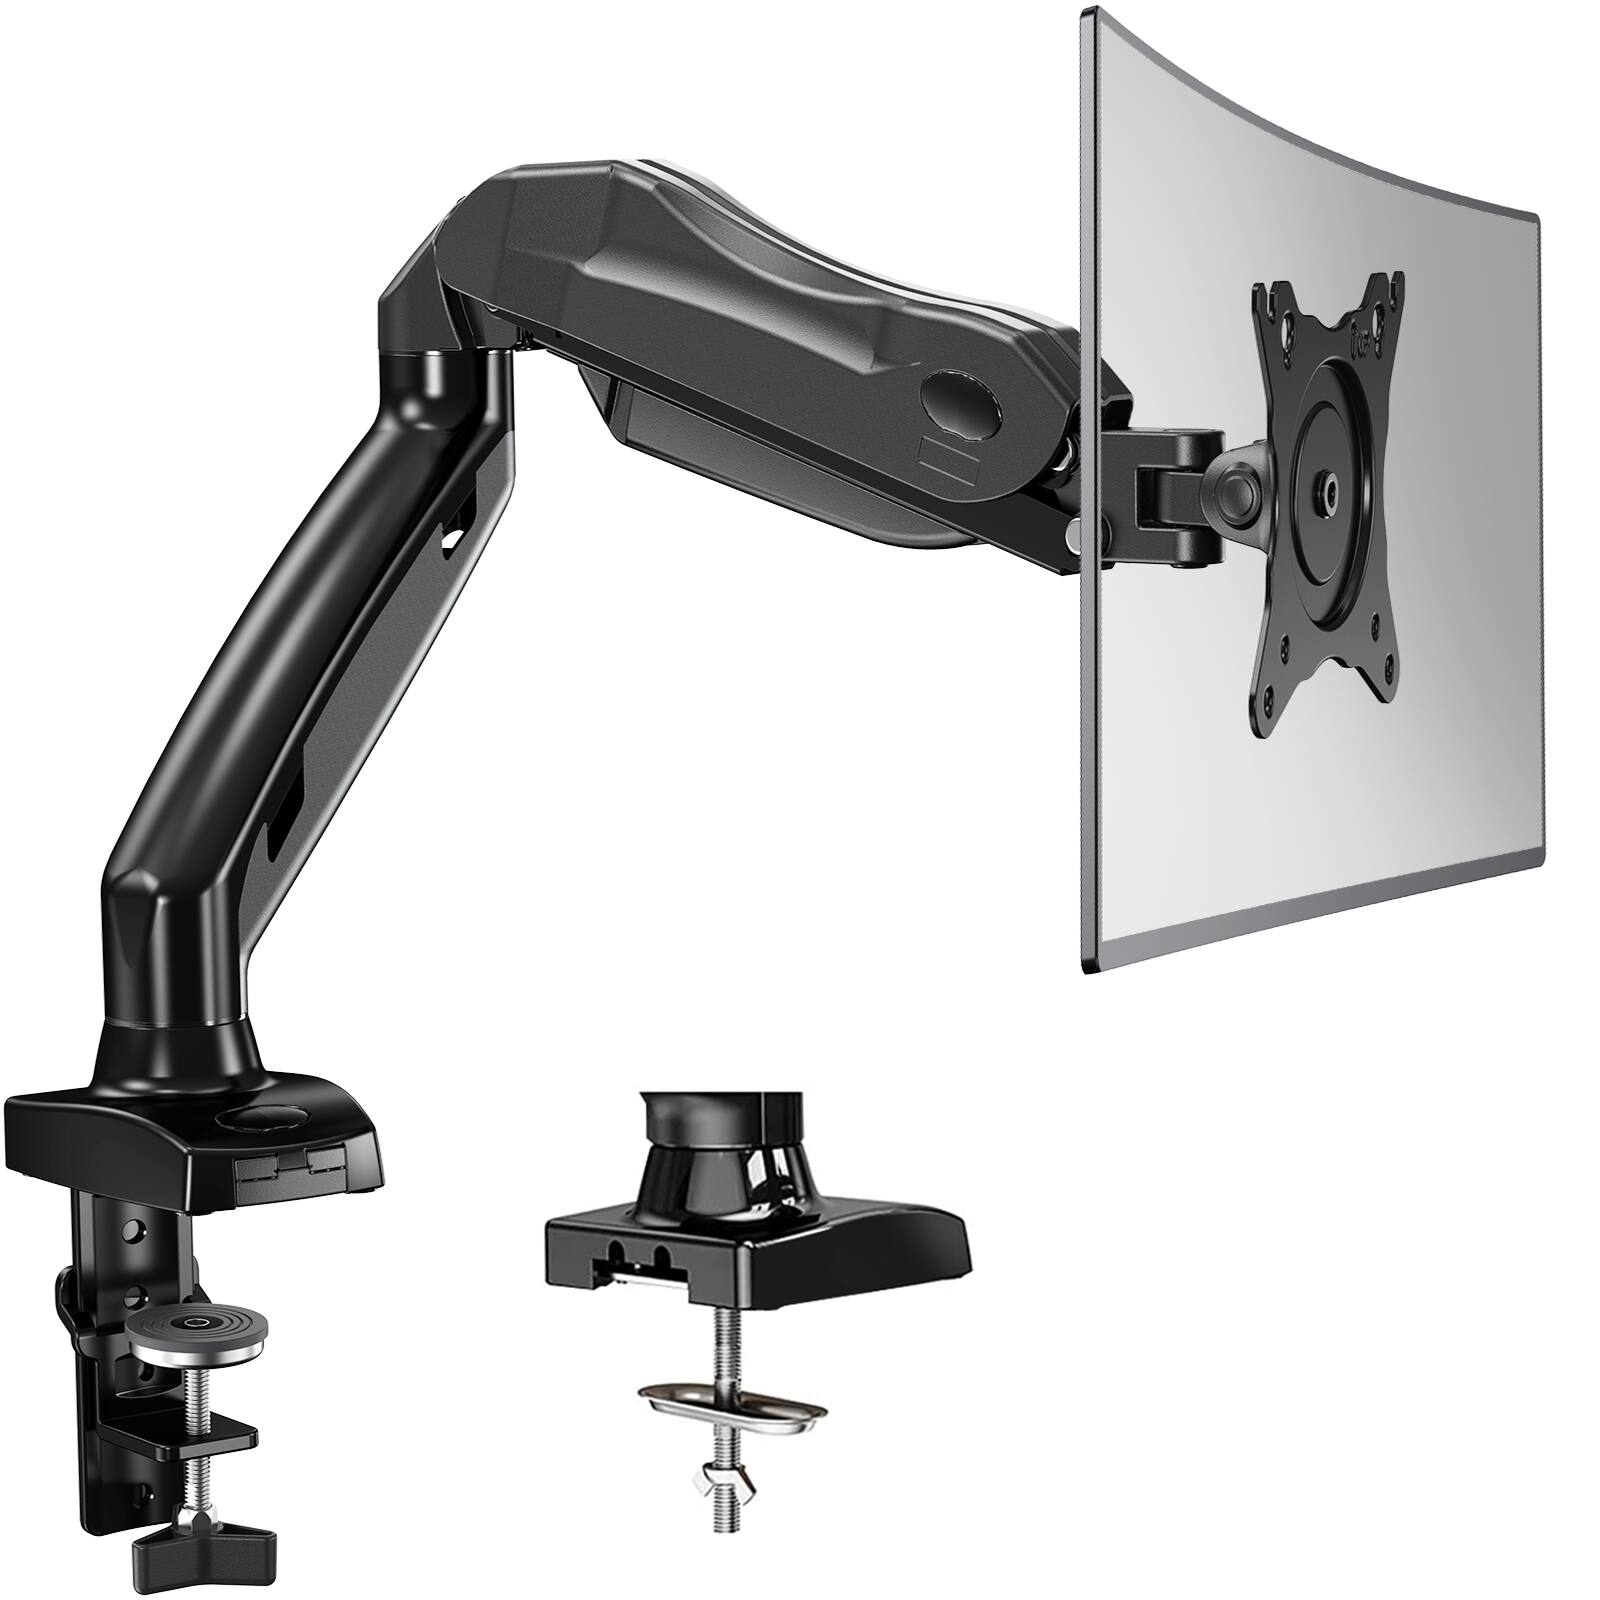 Perlesmith Single Monitor Mount with Articulating Gas Spring Fits 17-27 inch Monitors only for $18.99 + Free Shipping